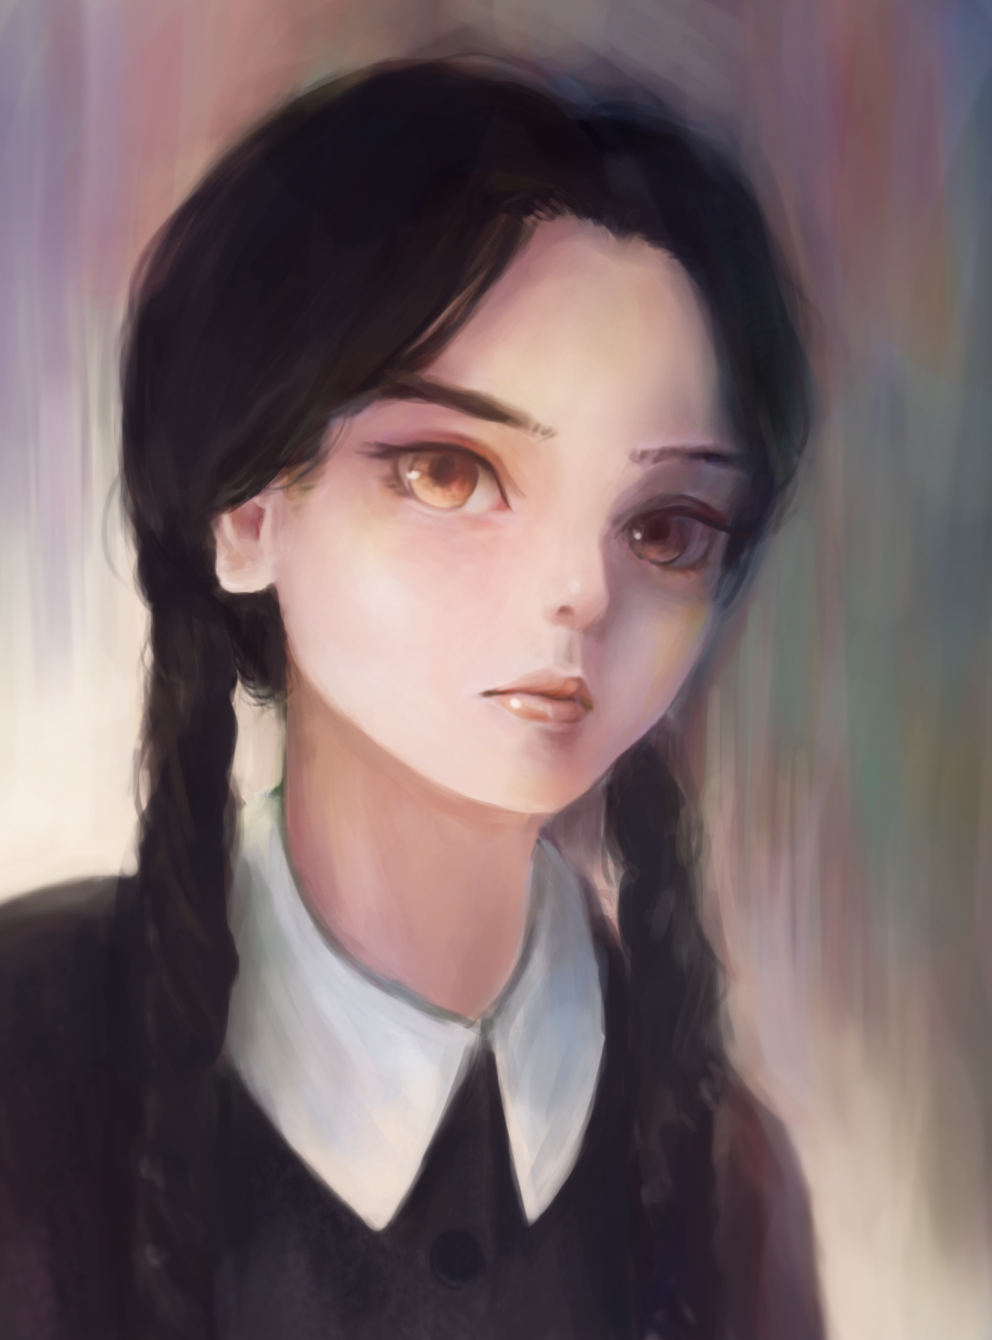 Digital Fanart of Wednesday Addams, need critique for improvement : r ...